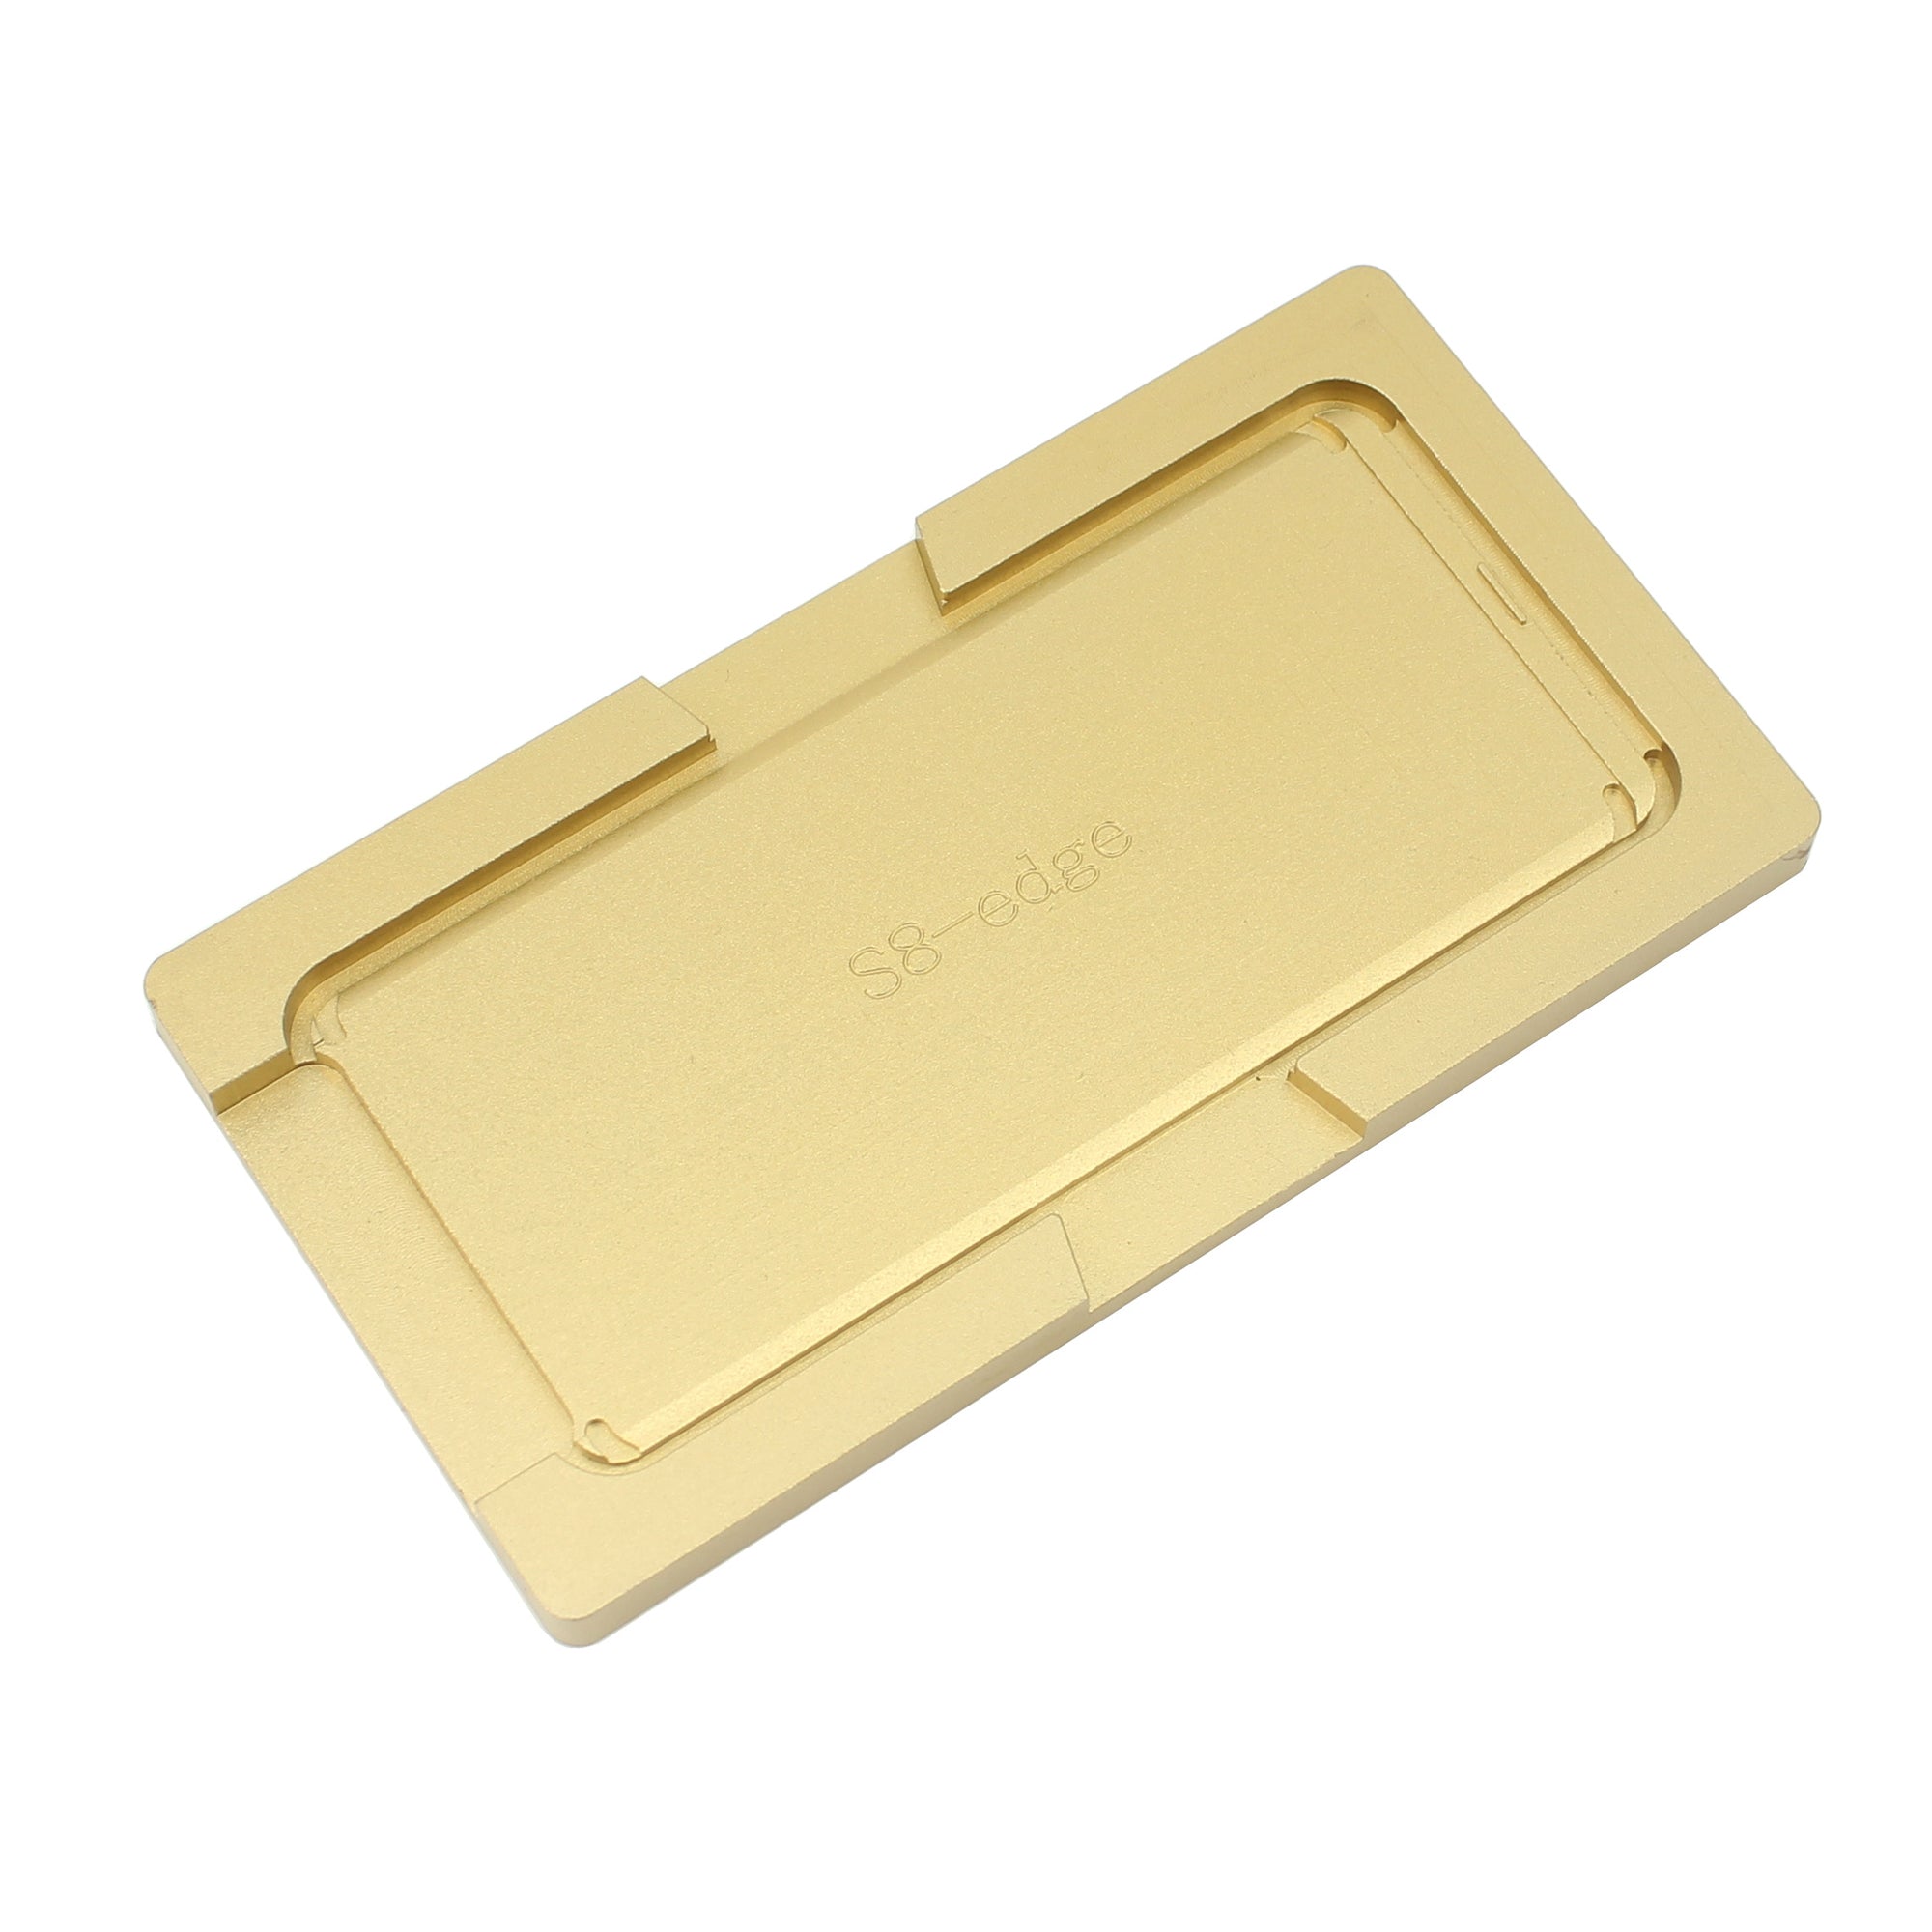 Metal Curved Screen Laminating Aligning Mould for Samsung Galaxy S8 SM-G950 - Gold Color